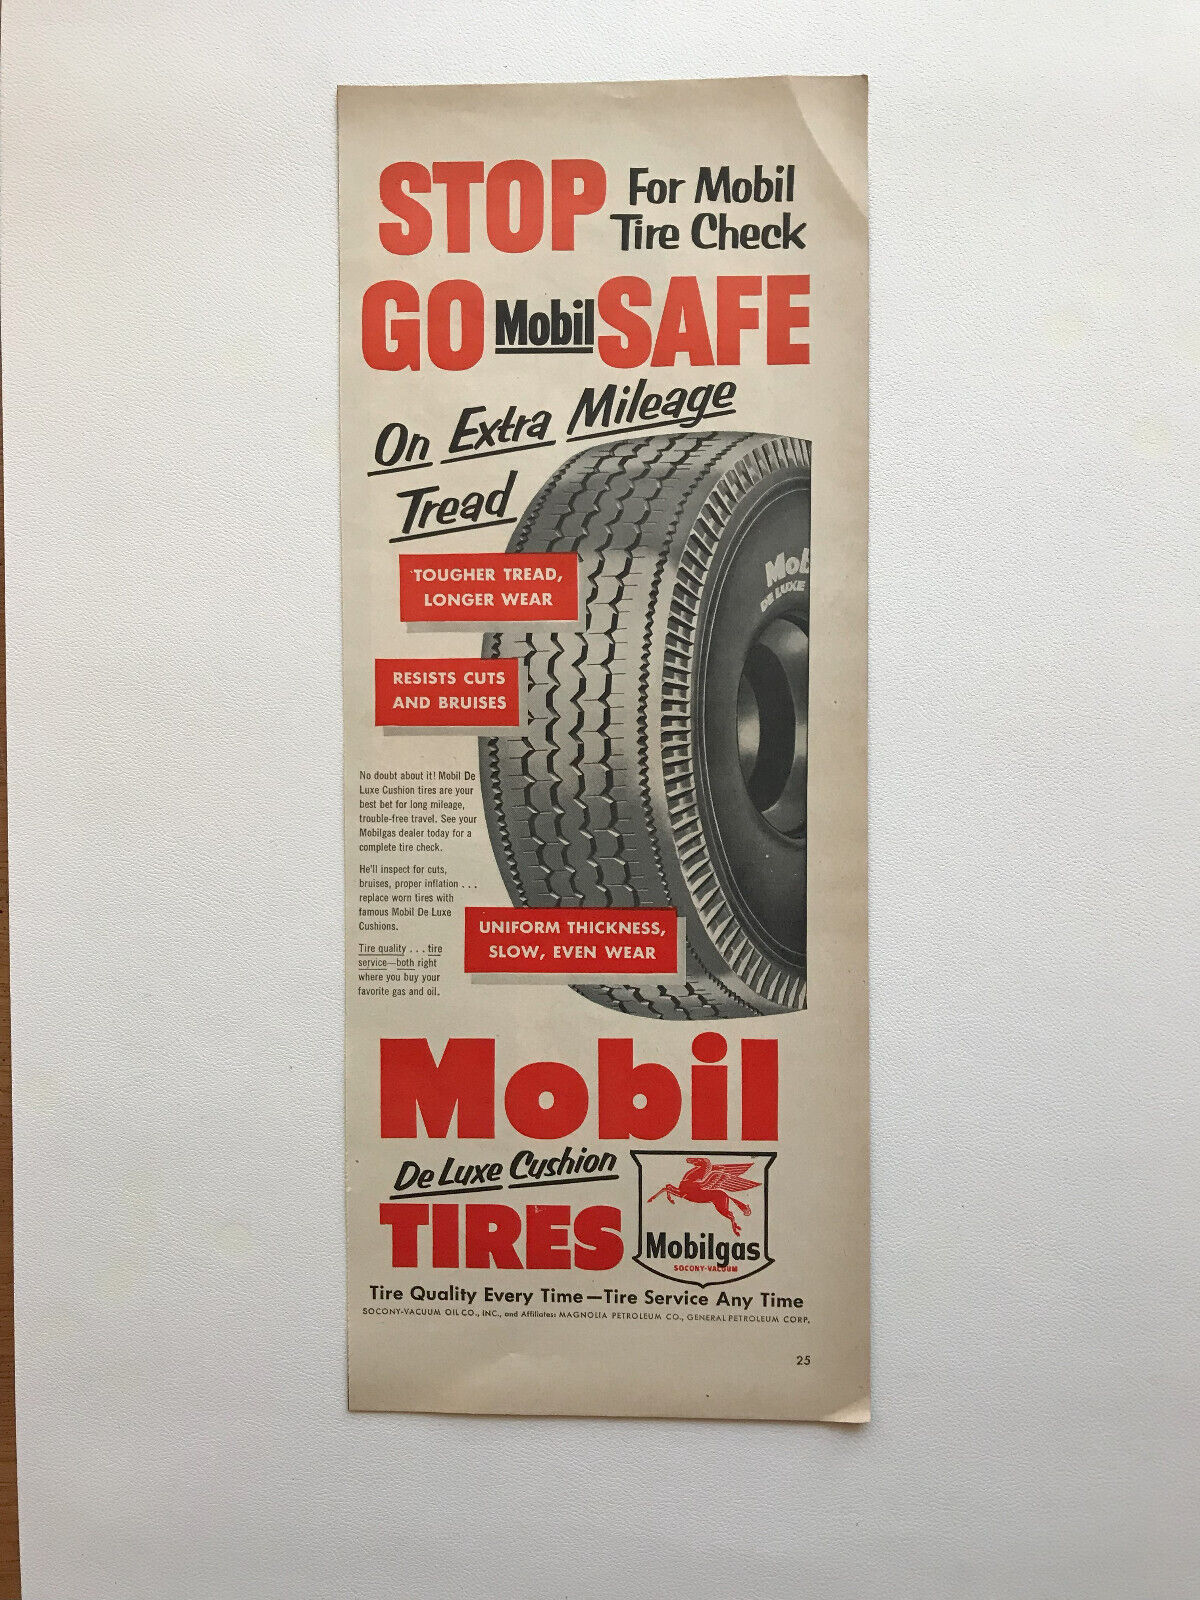 1953 Mobil Deluxe Cushion Tires Mobilgas Vintage Print Ad